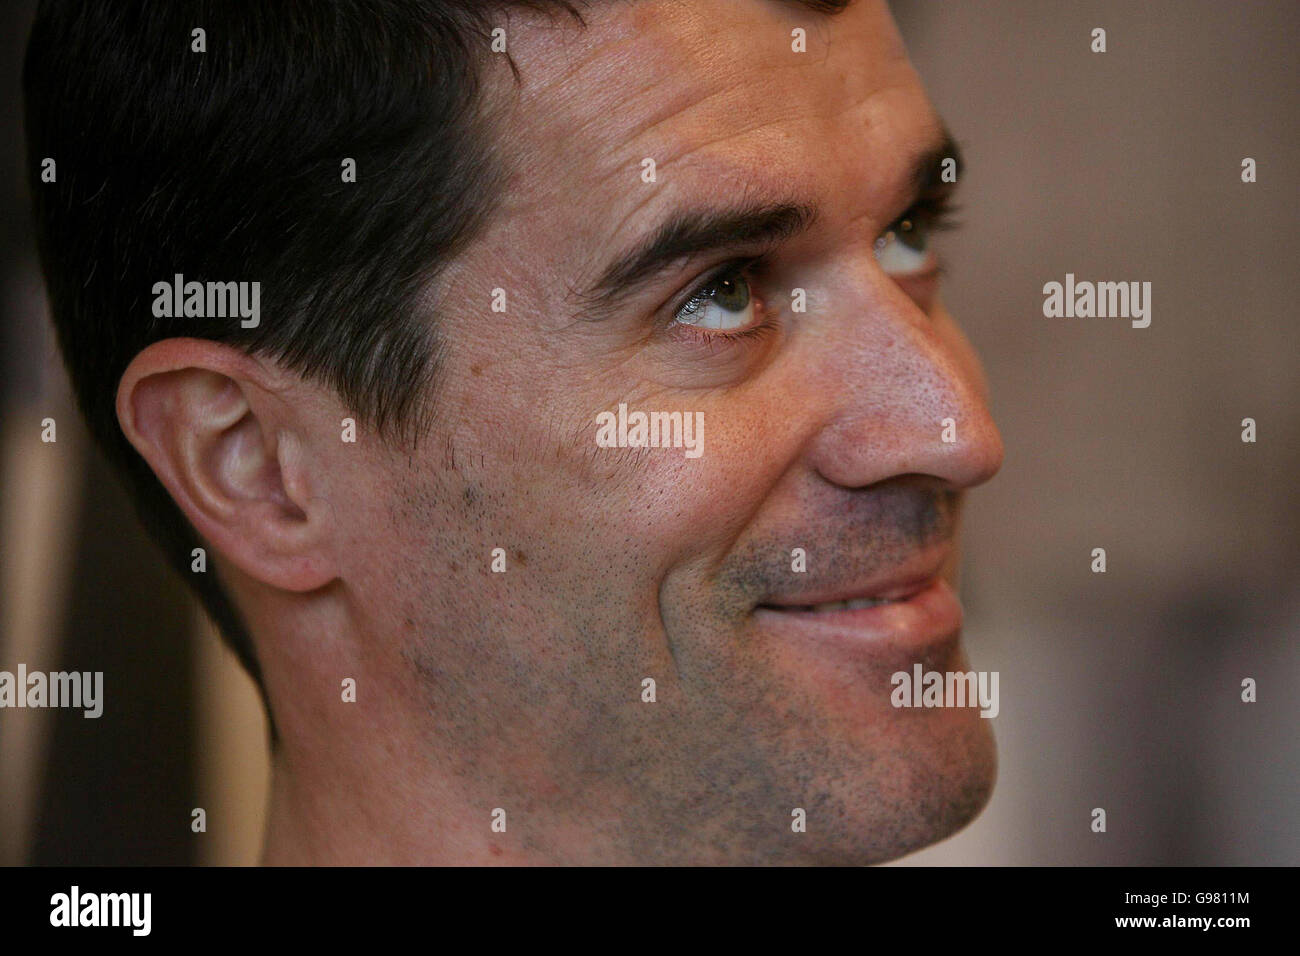 Glasgow Celtic Soccer Star Roy Keane during an Irish Guide Dogs for the Blind press conference in Dublin, Tuesday March 14 2006, where they launched the 'Shades 2006' campaign'. Roy Keane invited schools, businesses and organisations to register now for 'shades week' which starts on May 1. PRESS ASSOCIATION Photo. Photo credit should read: Julien Behal/PA Stock Photo